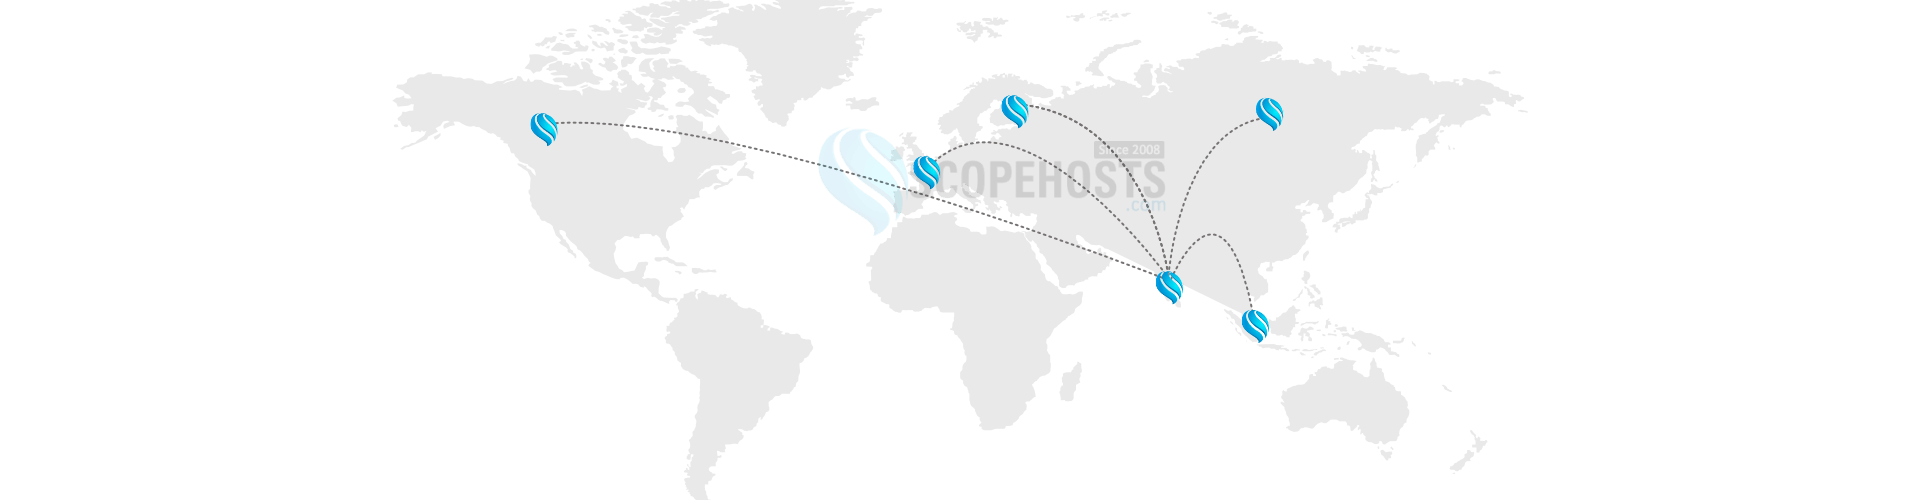 World map Shows Scopehosts Datacenters